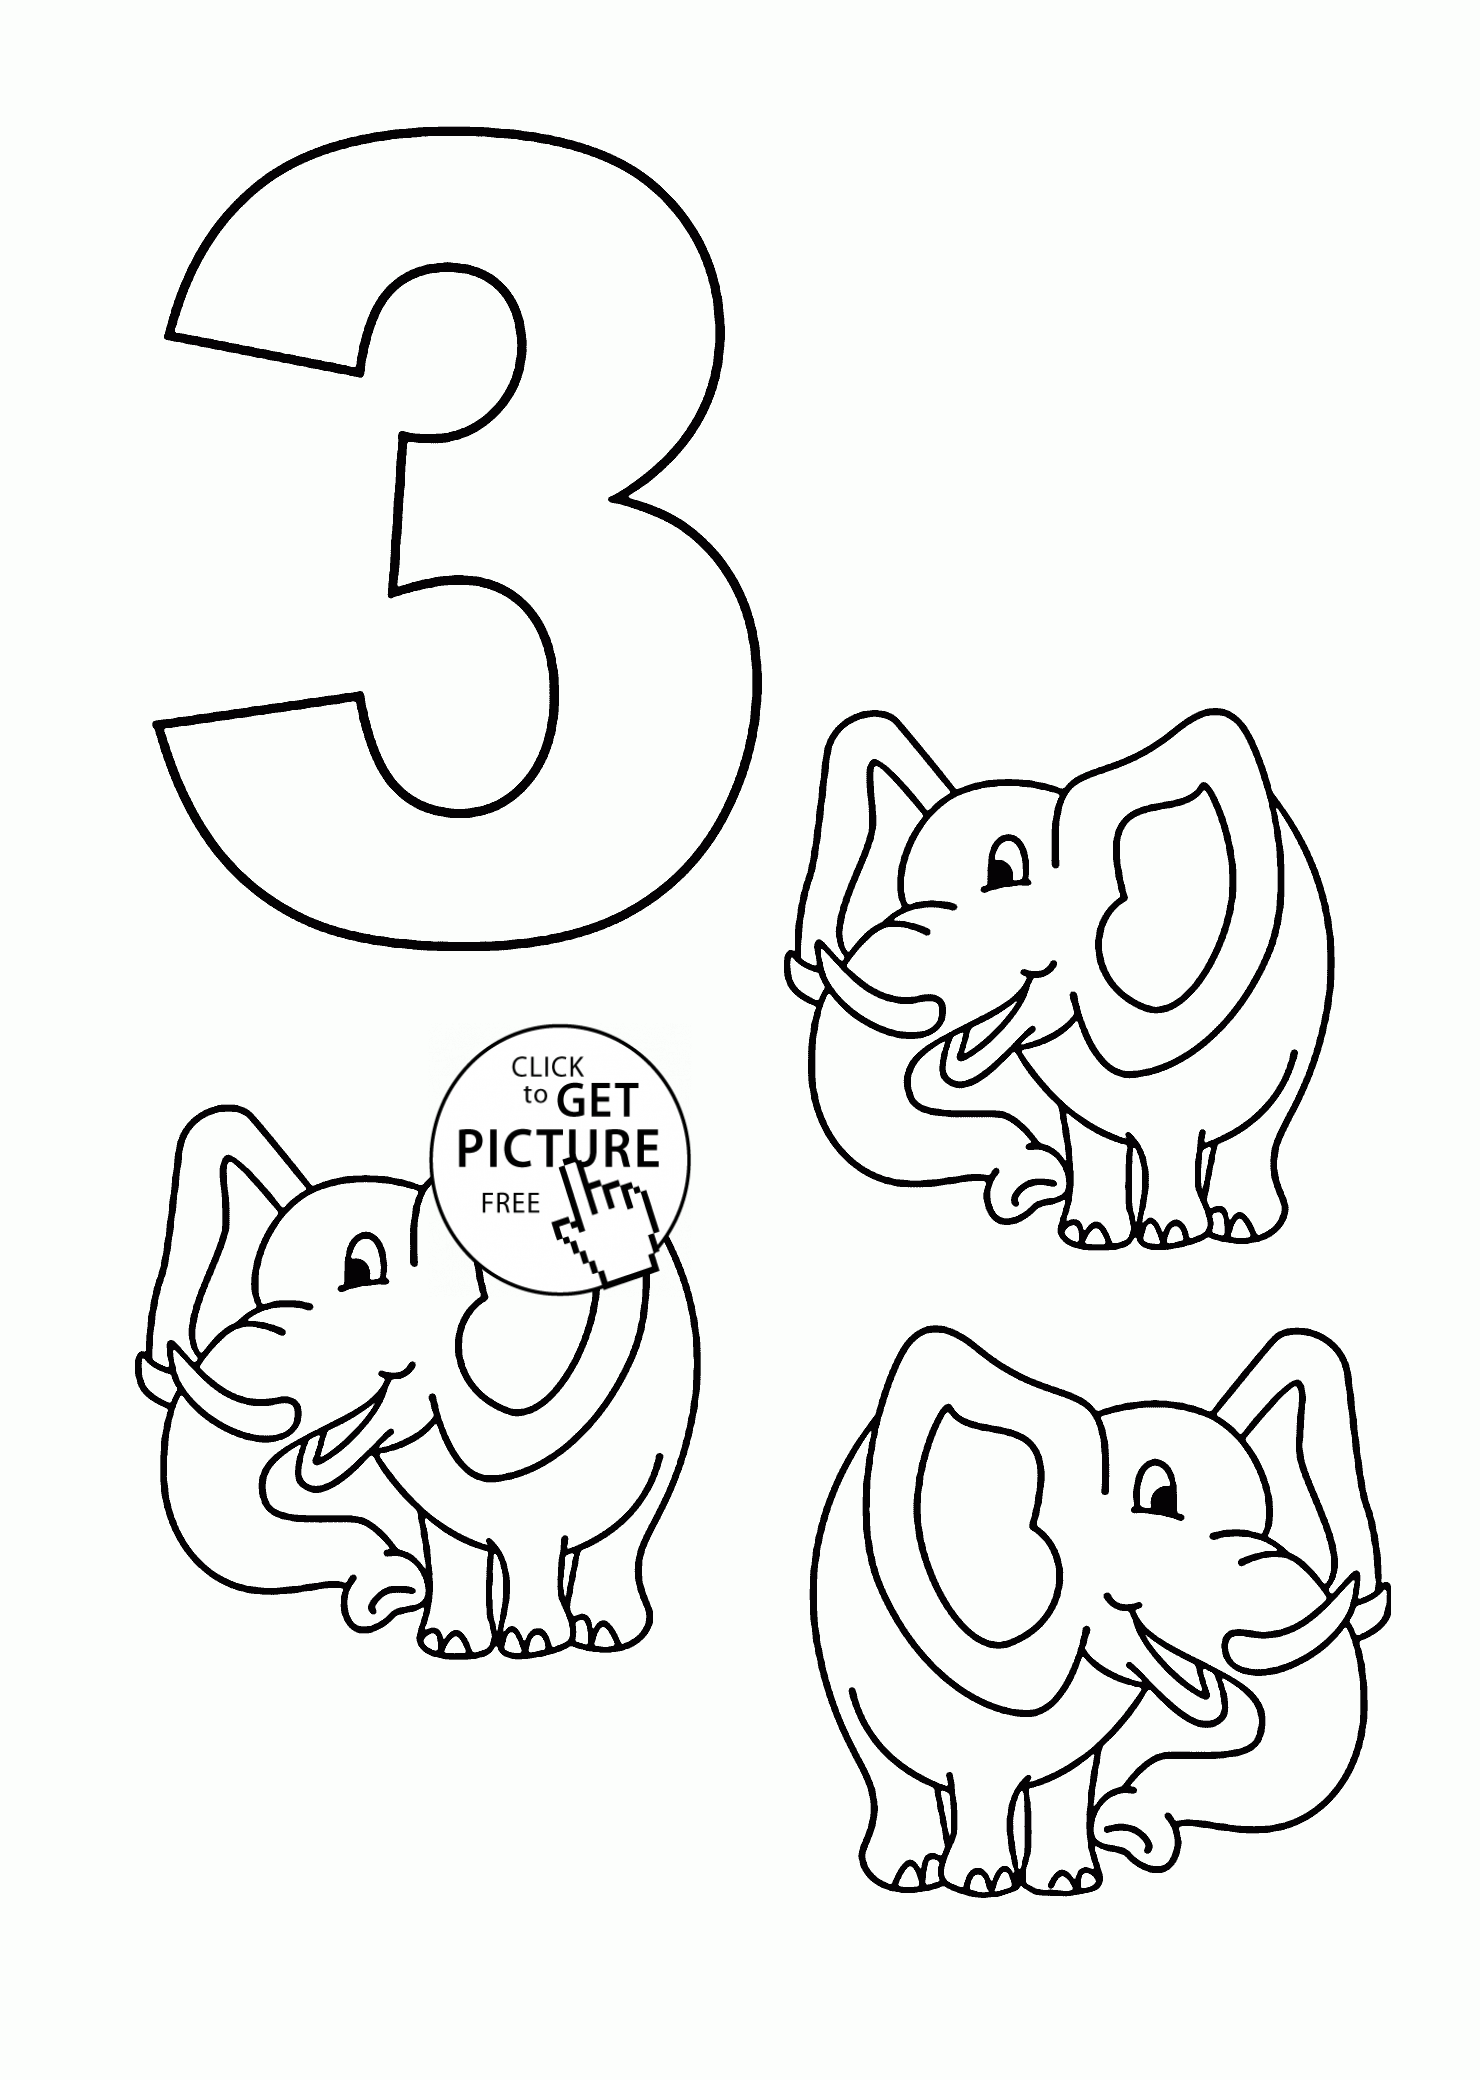 free-number-3-coloring-page-download-free-number-3-coloring-page-png-images-free-cliparts-on